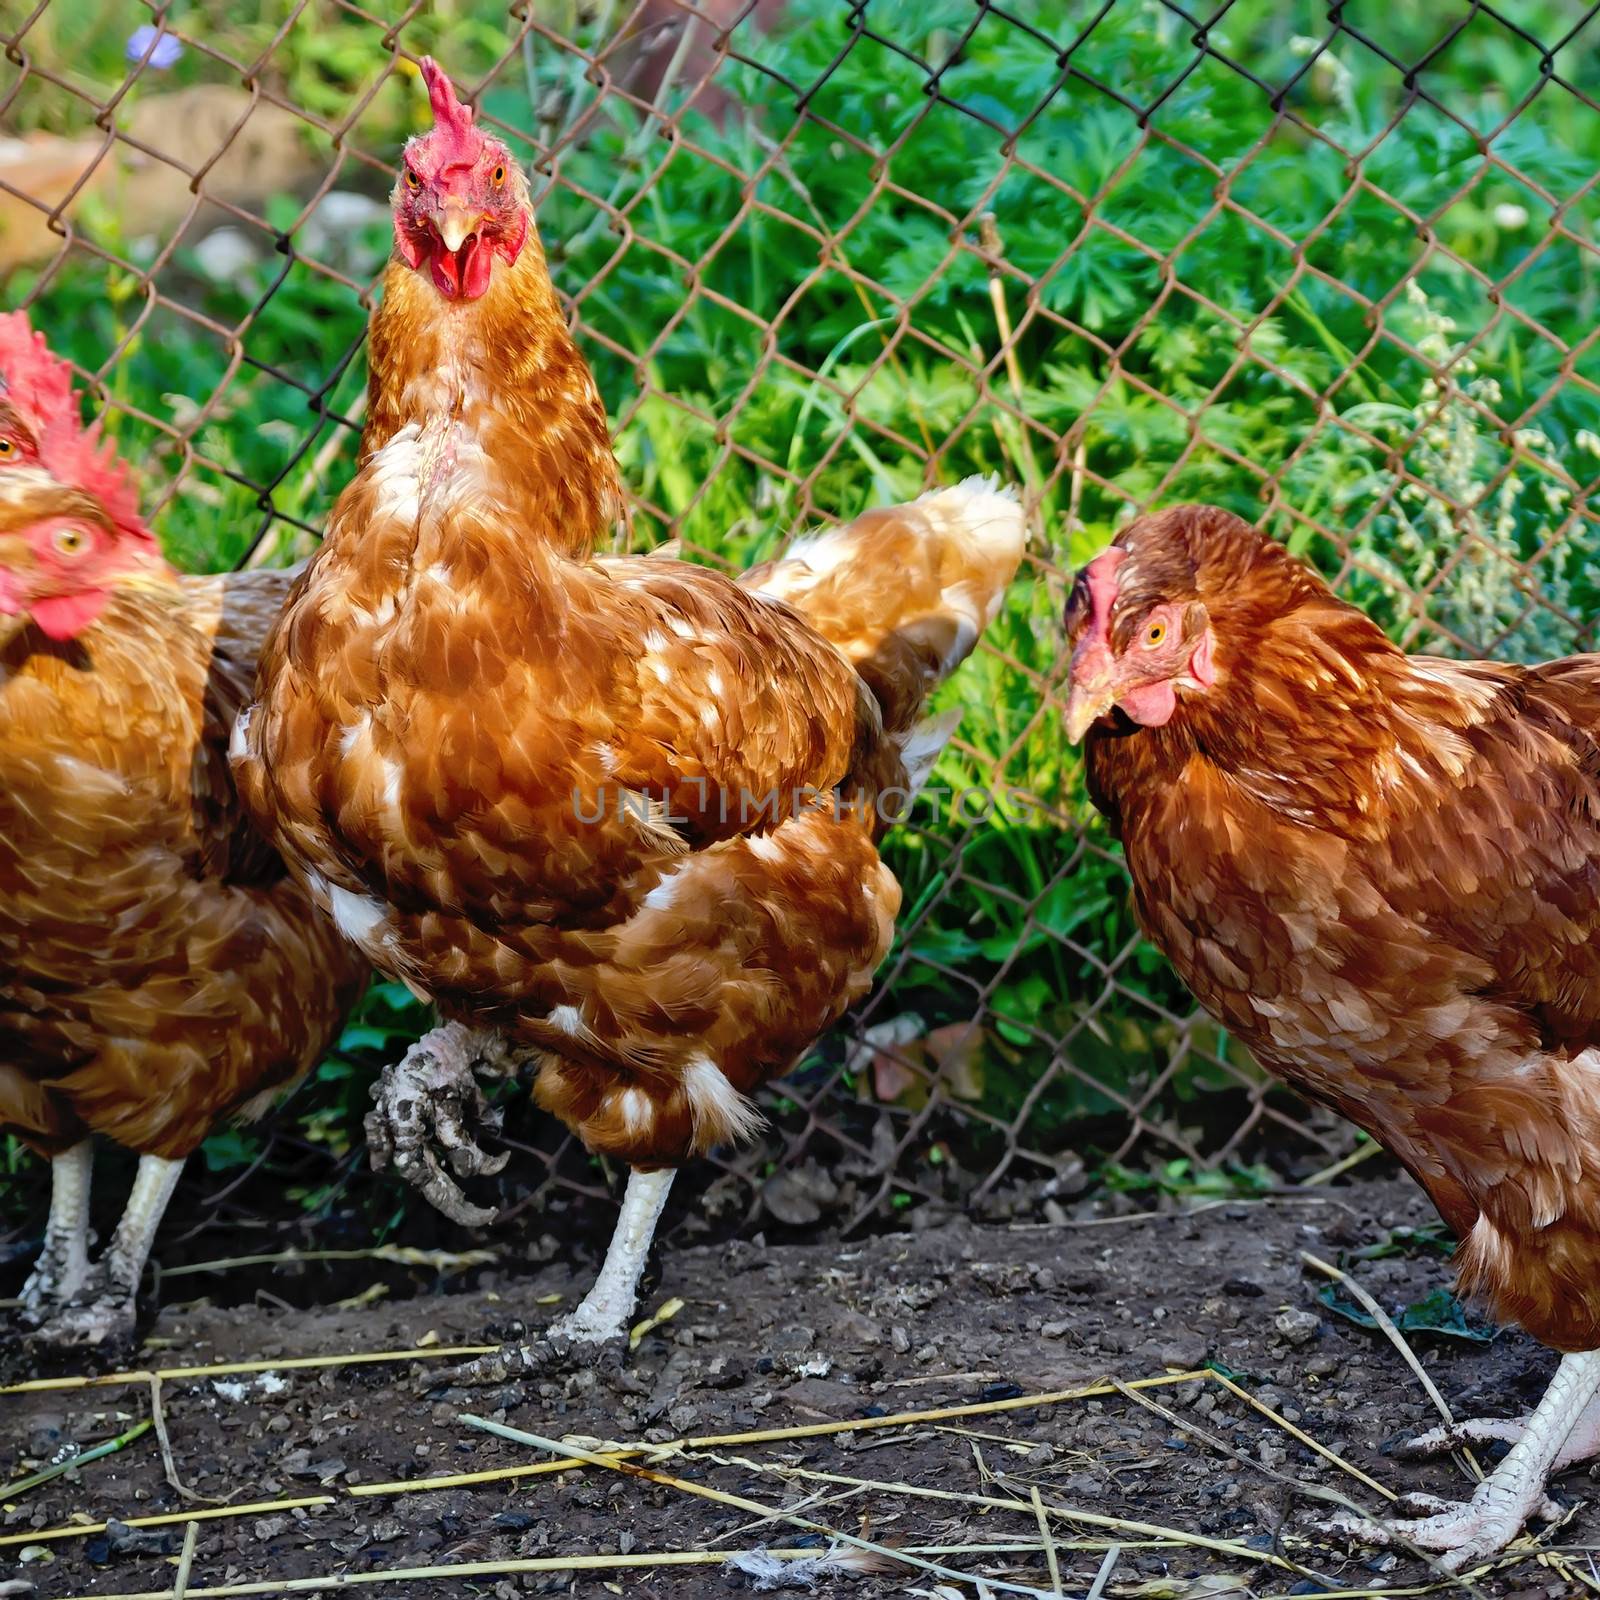 Several brown chicken on a background of black soil and green grass in the henhouse